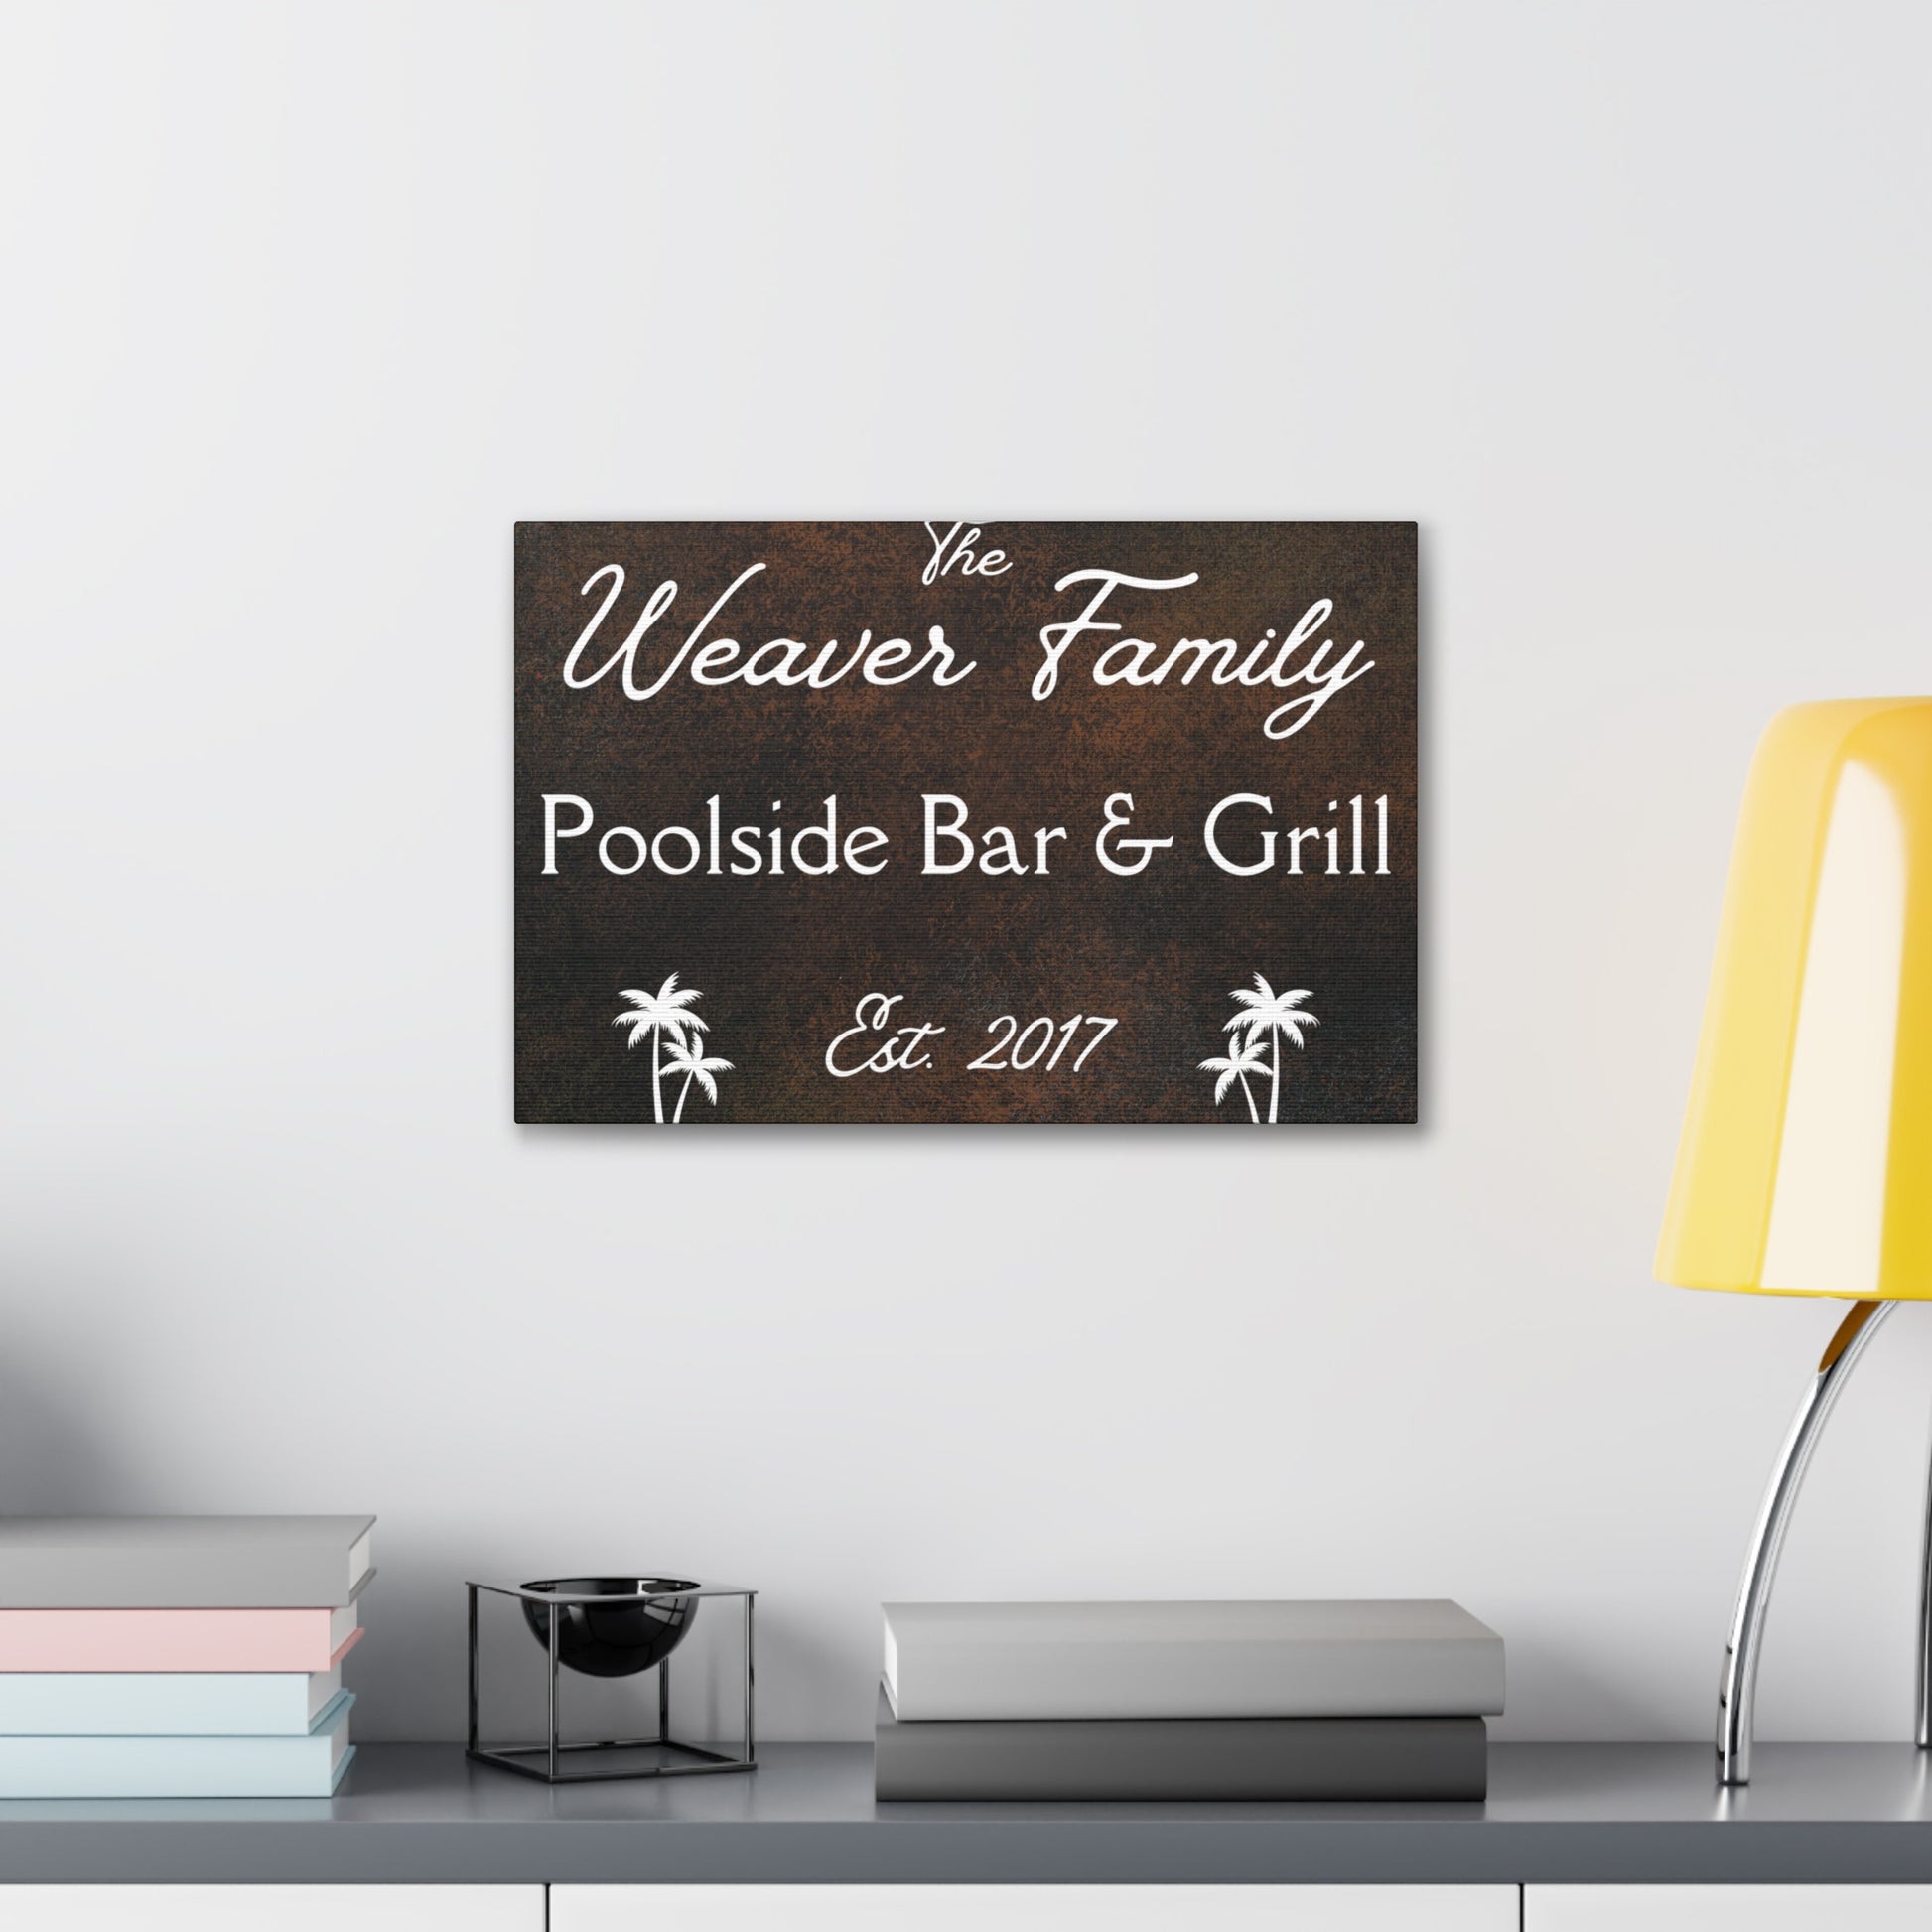 Custom "Poolside Bar & Grill" Wall Art - Weave Got Gifts - Unique Gifts You Won’t Find Anywhere Else!